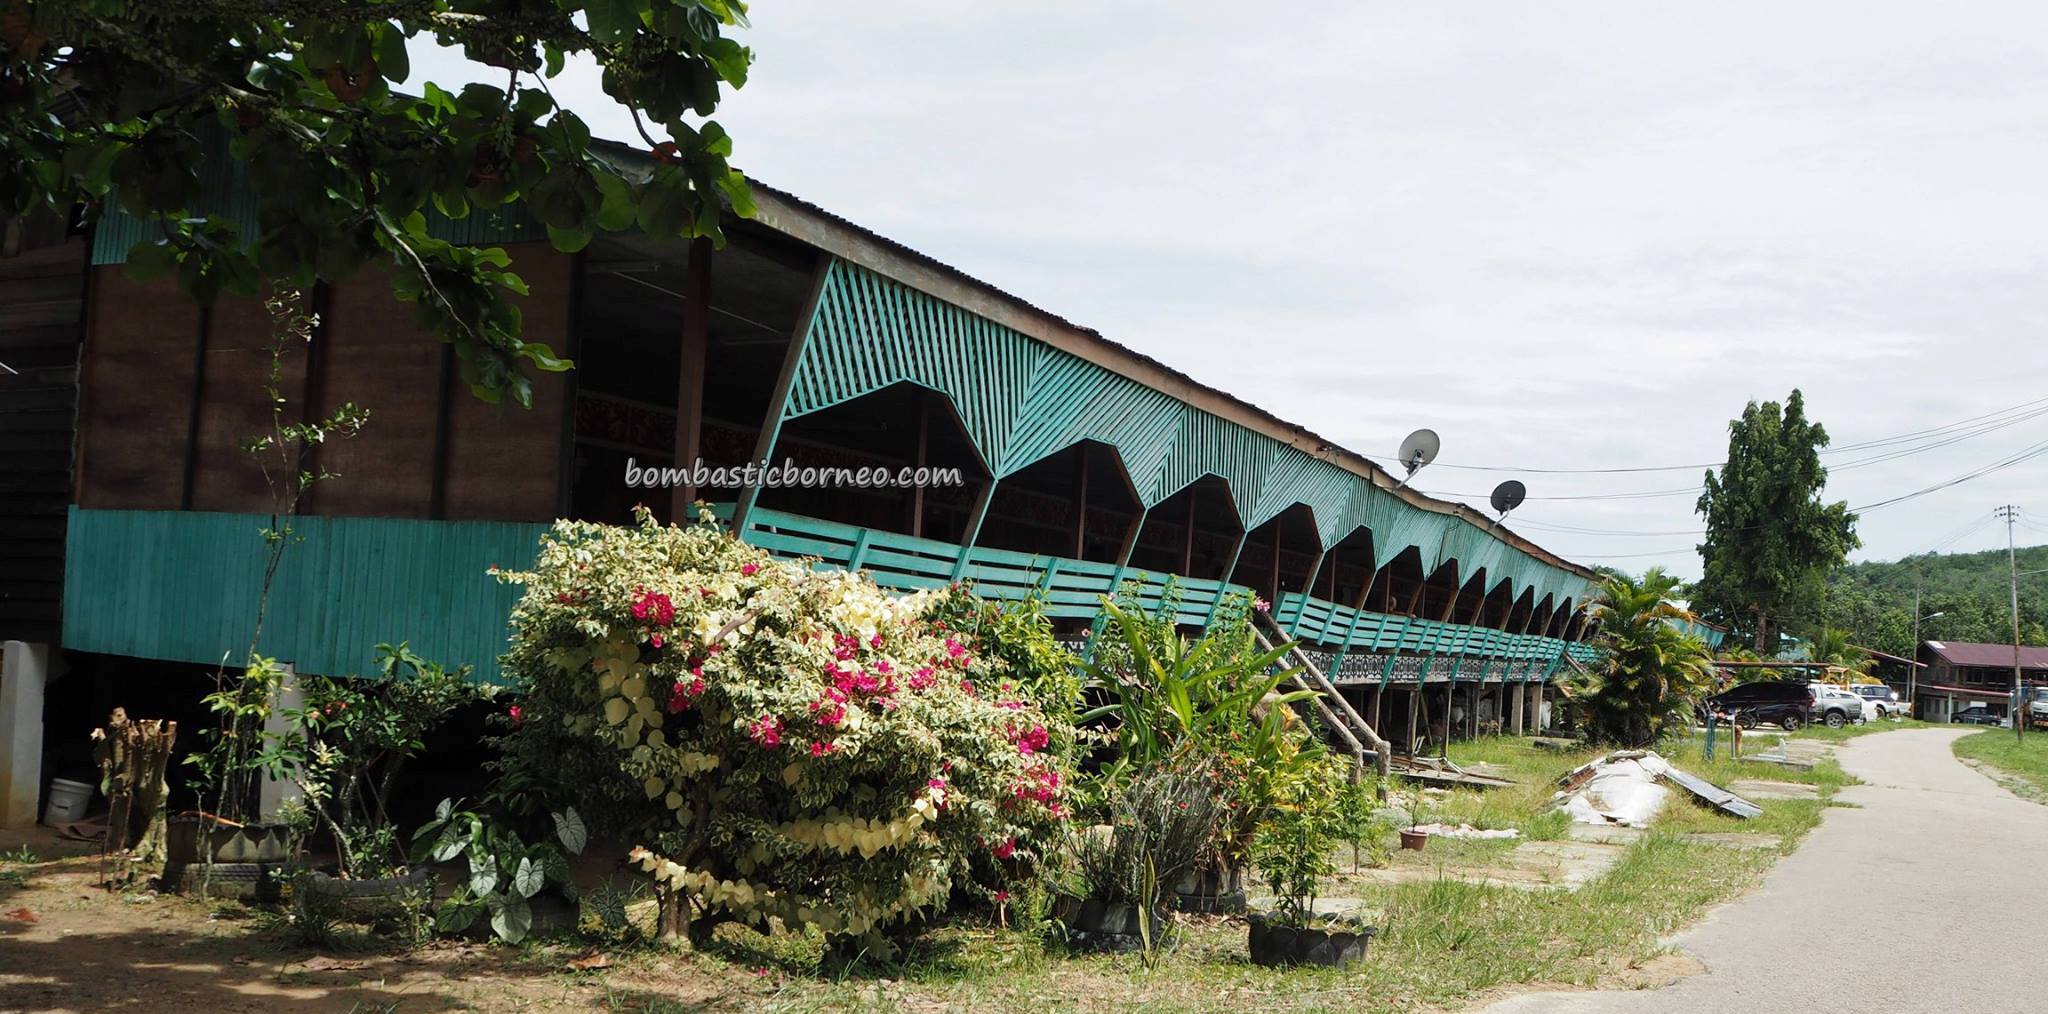 longhouse, authentic, traditional, destination, Borneo, Interior Division, dayak lundayeh, Lun Bawang, orang asal, Tourism, tourist attraction, travel guide, village, transborder, 沙巴旅游景点, 原著民长屋